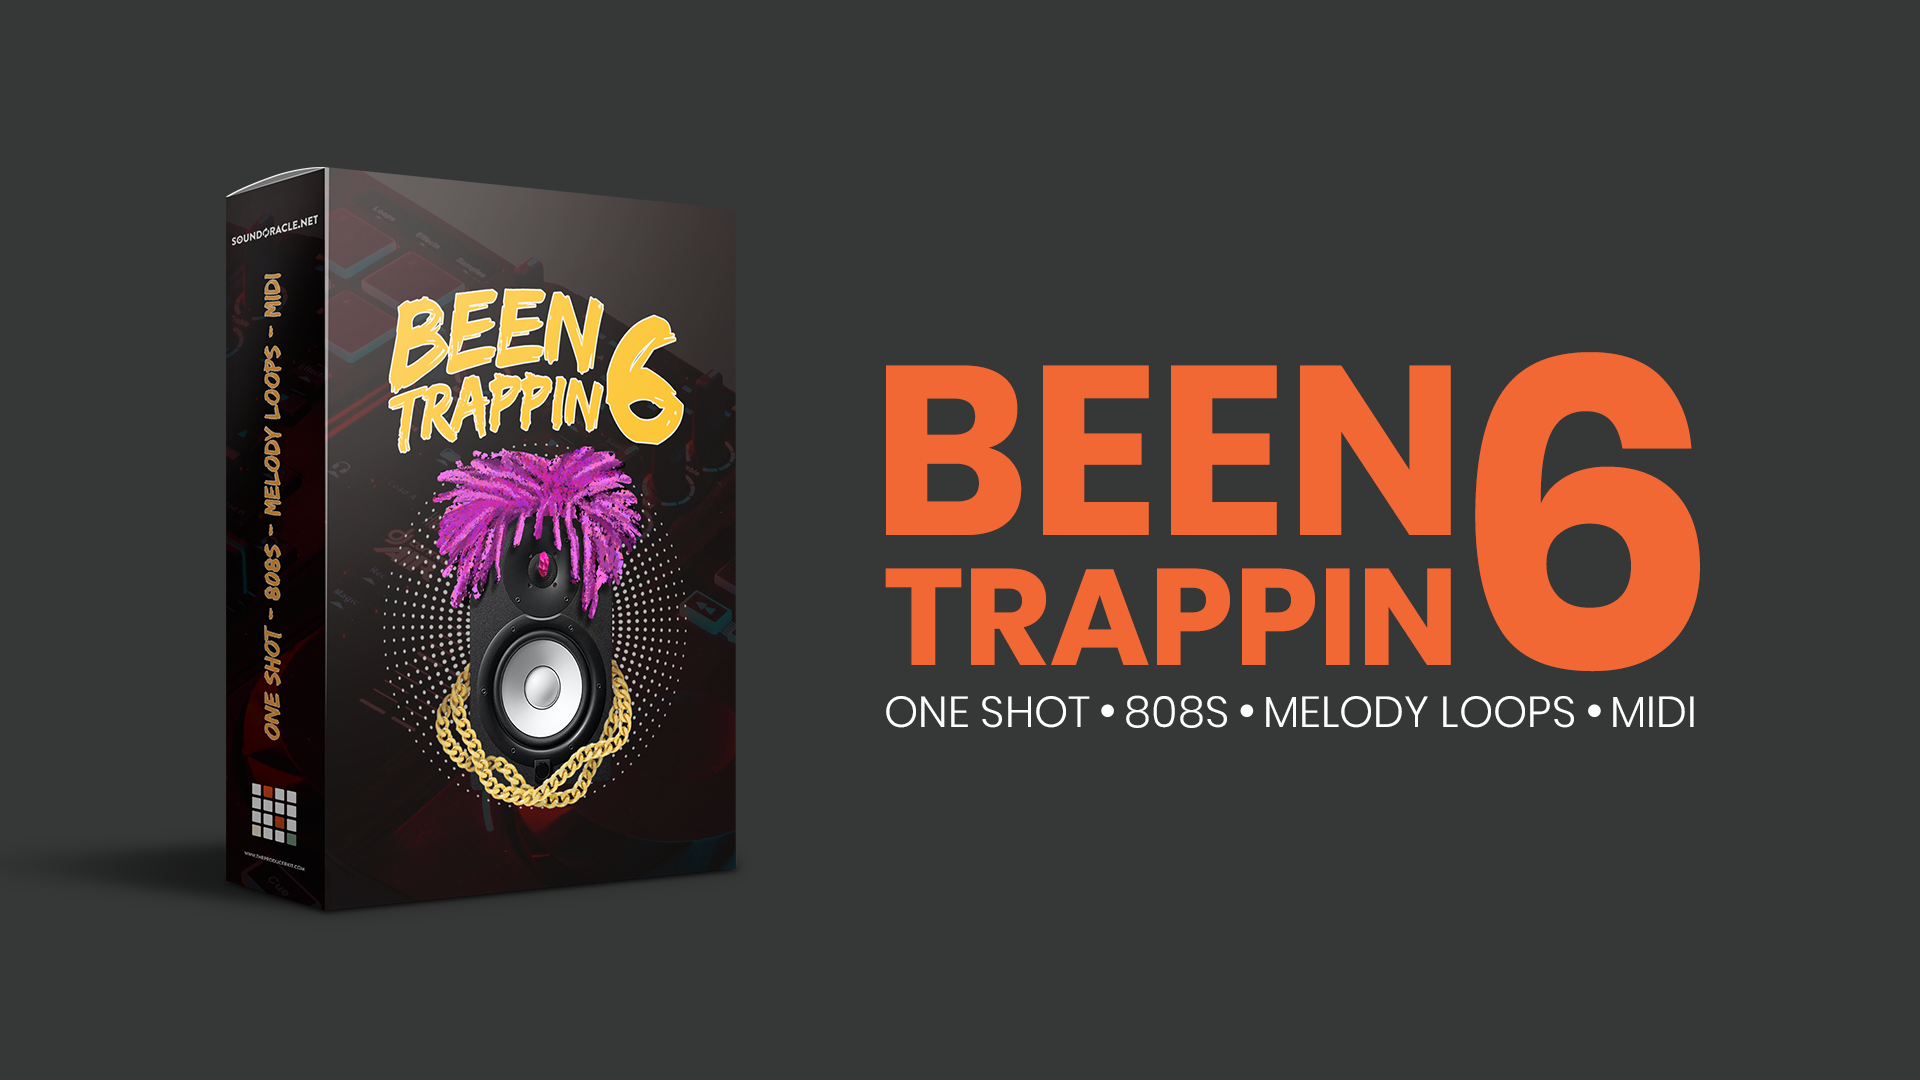 Click Here To Get Been Trappin 6 + Bonuses